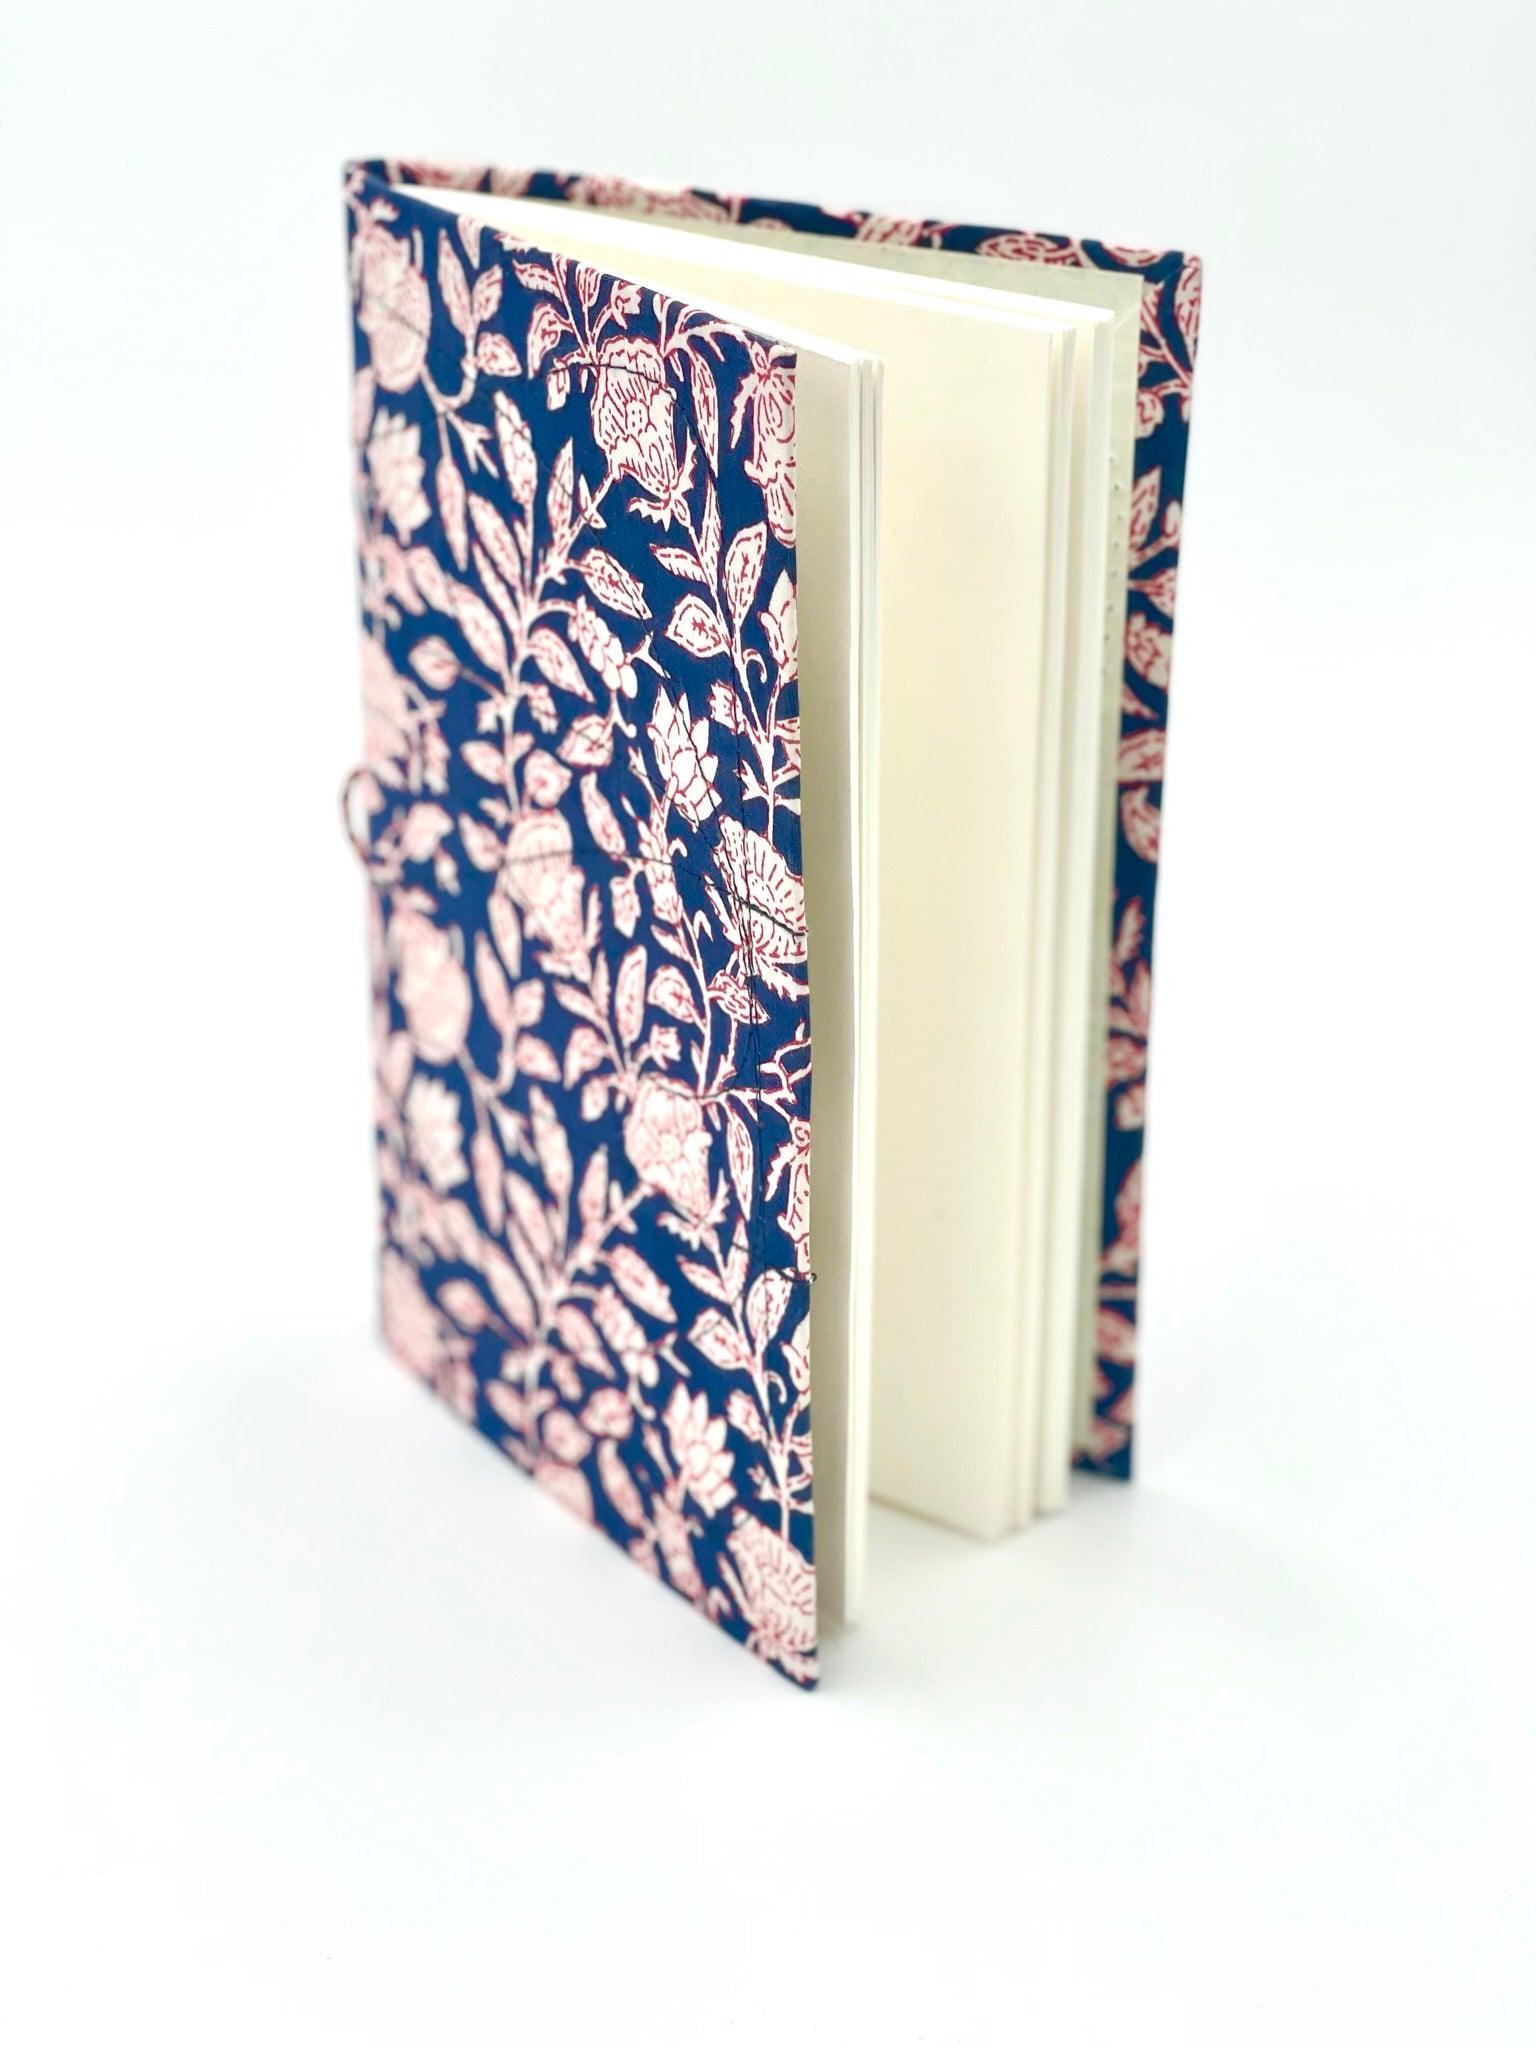 Block Print Journal/Notebook, Navy Blue & White - Unlined, 100 Pages, Thick Paper, Hard Cover - Transcend